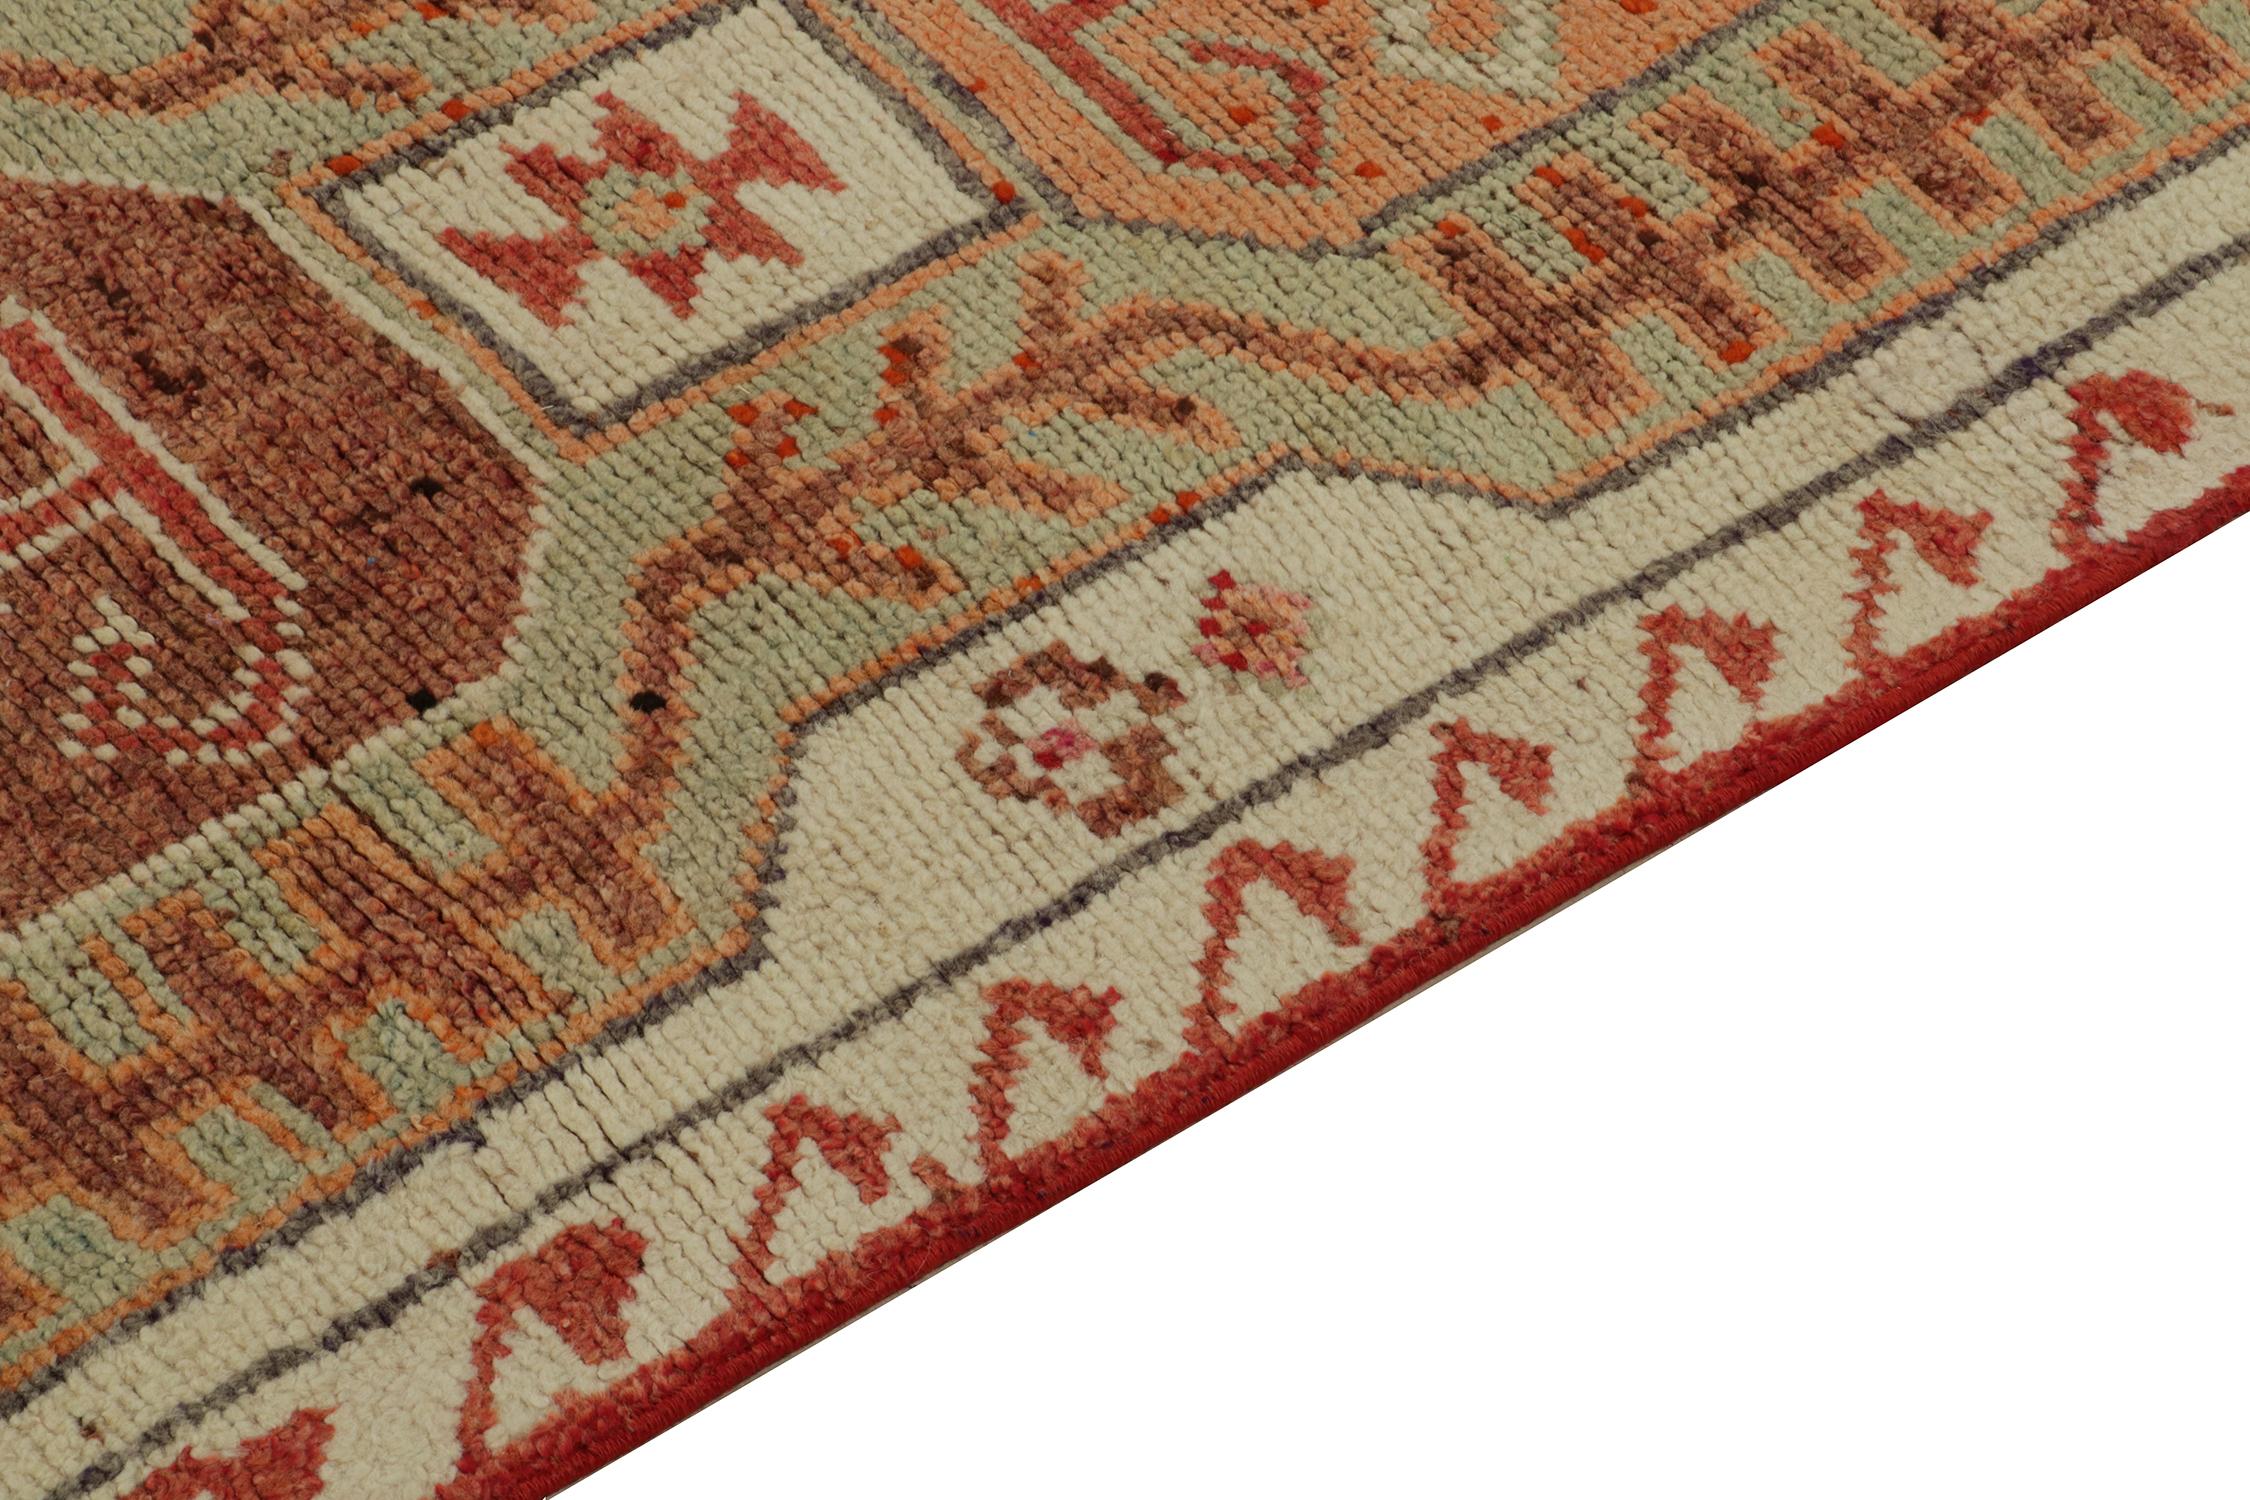 1950s Vintage Tribal Runner in Green Red, Beige Geometric Pattern by Rug & Kilim In Good Condition For Sale In Long Island City, NY